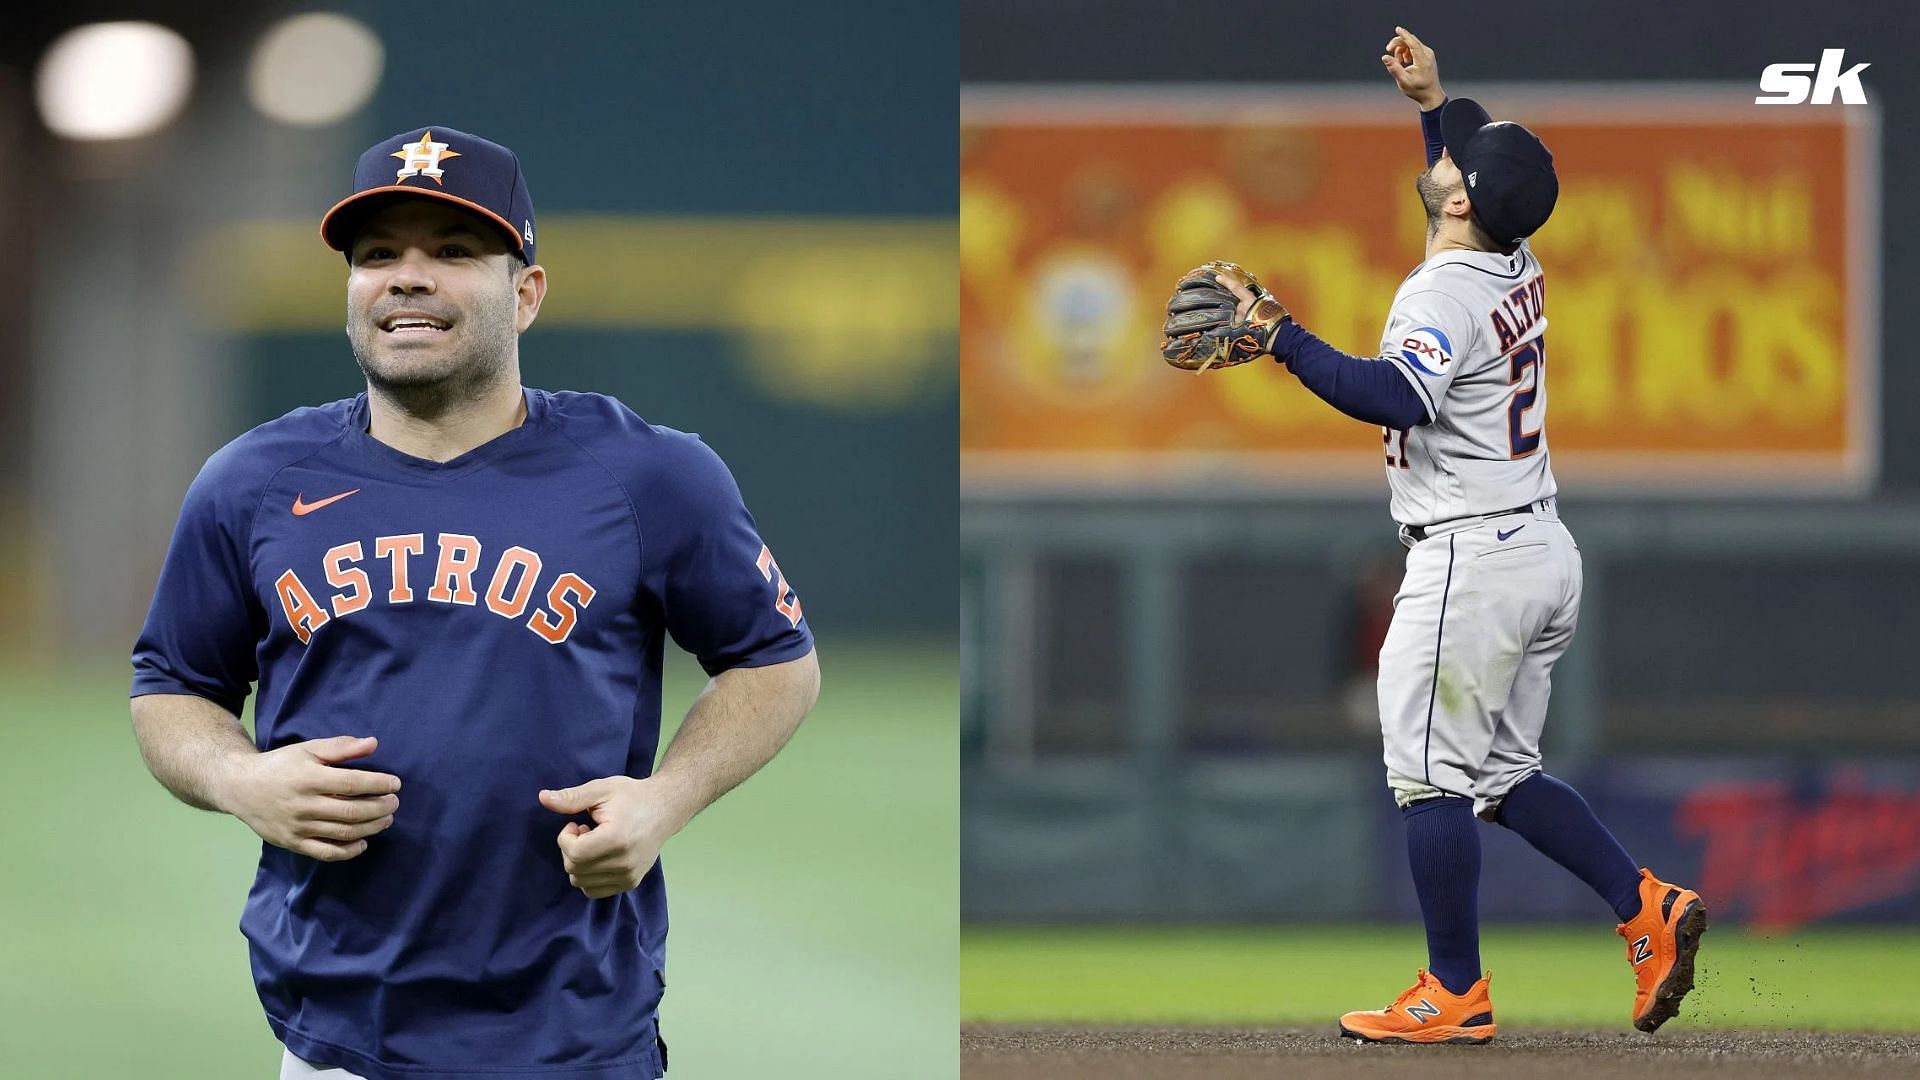 Jose Altuve News: Astros 2B agrees to five-year, $125,000,000 extension to remain in Houston for rest of MLB career